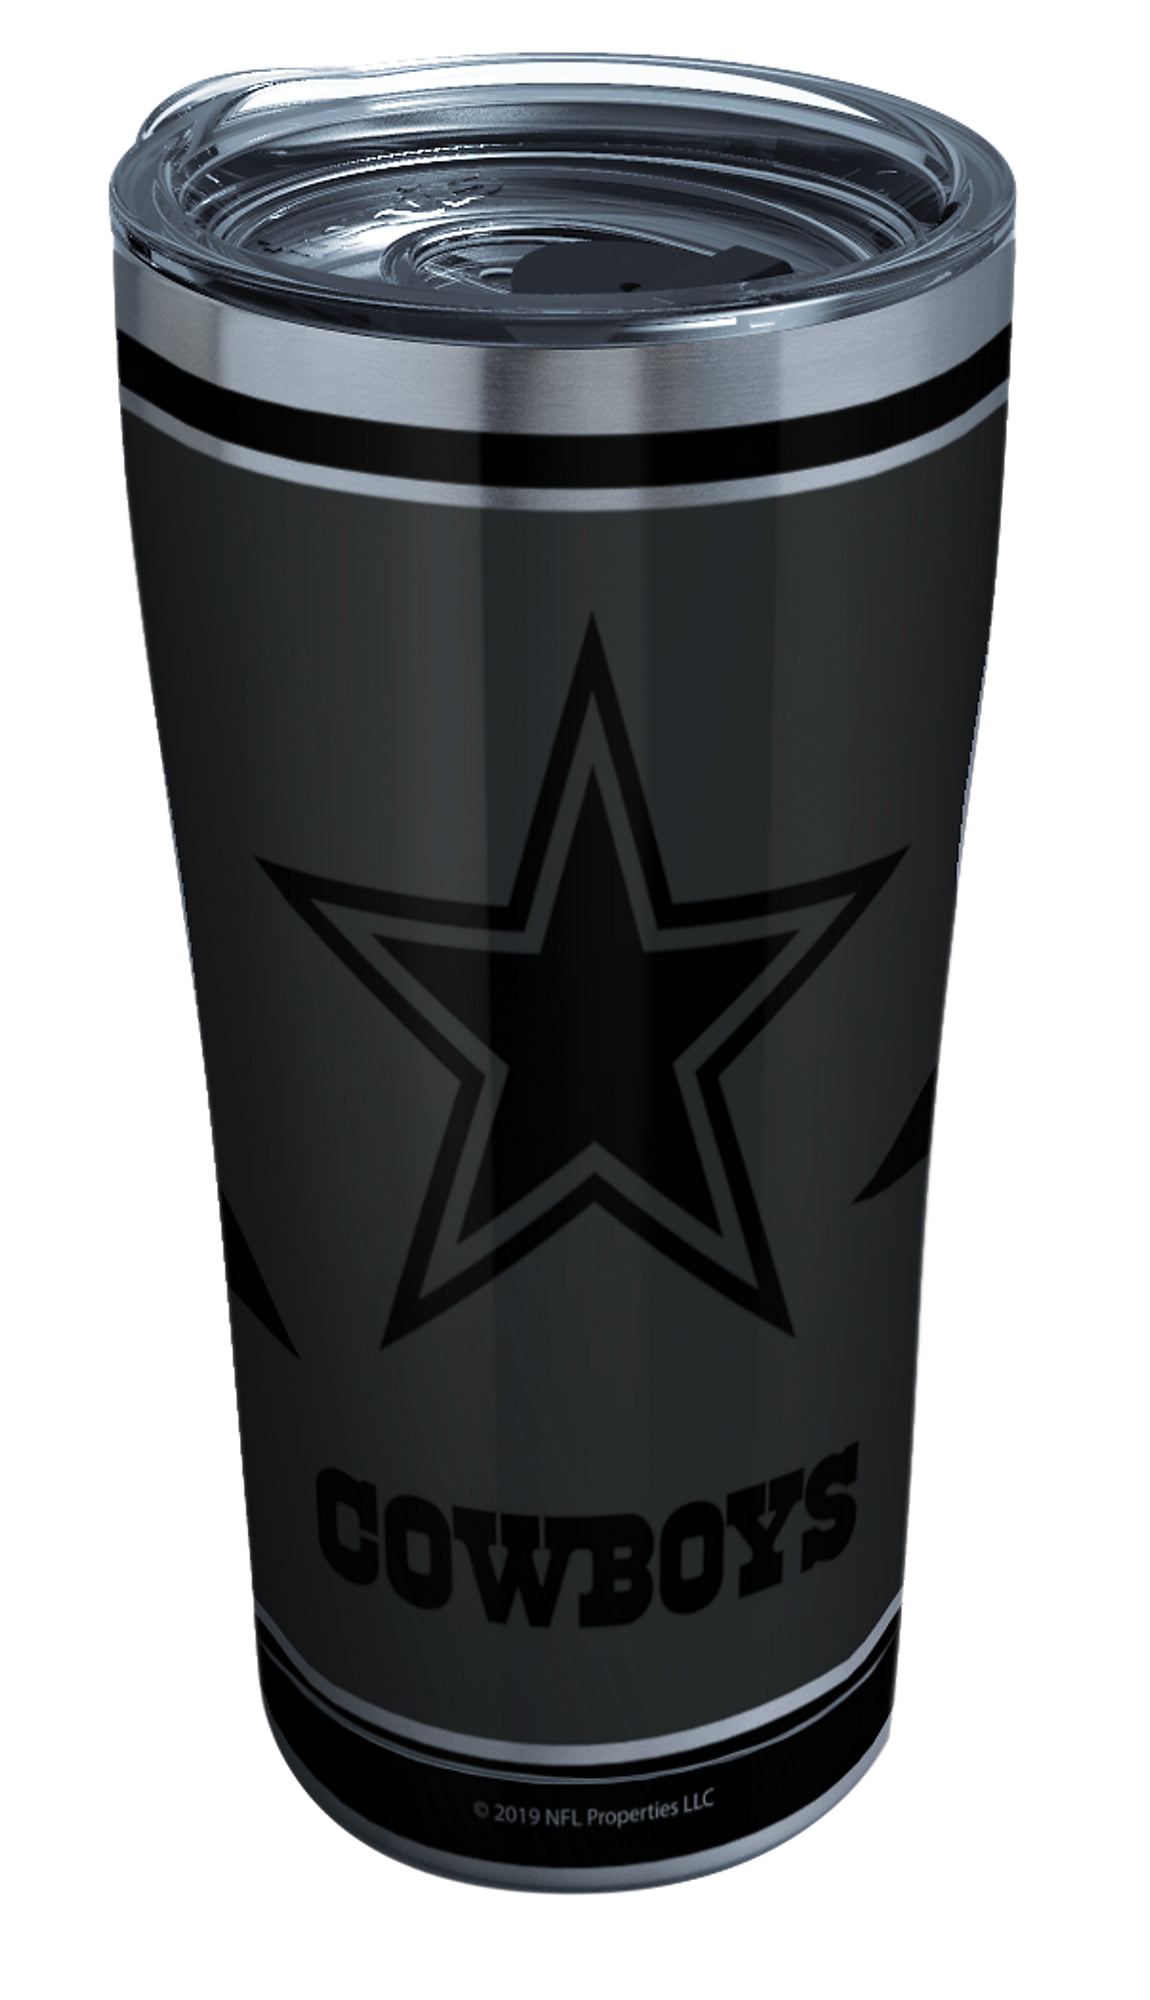 Dallas Cowboys 24oz. Cool Vibes Jr. Thirst Hydration Water Bottle